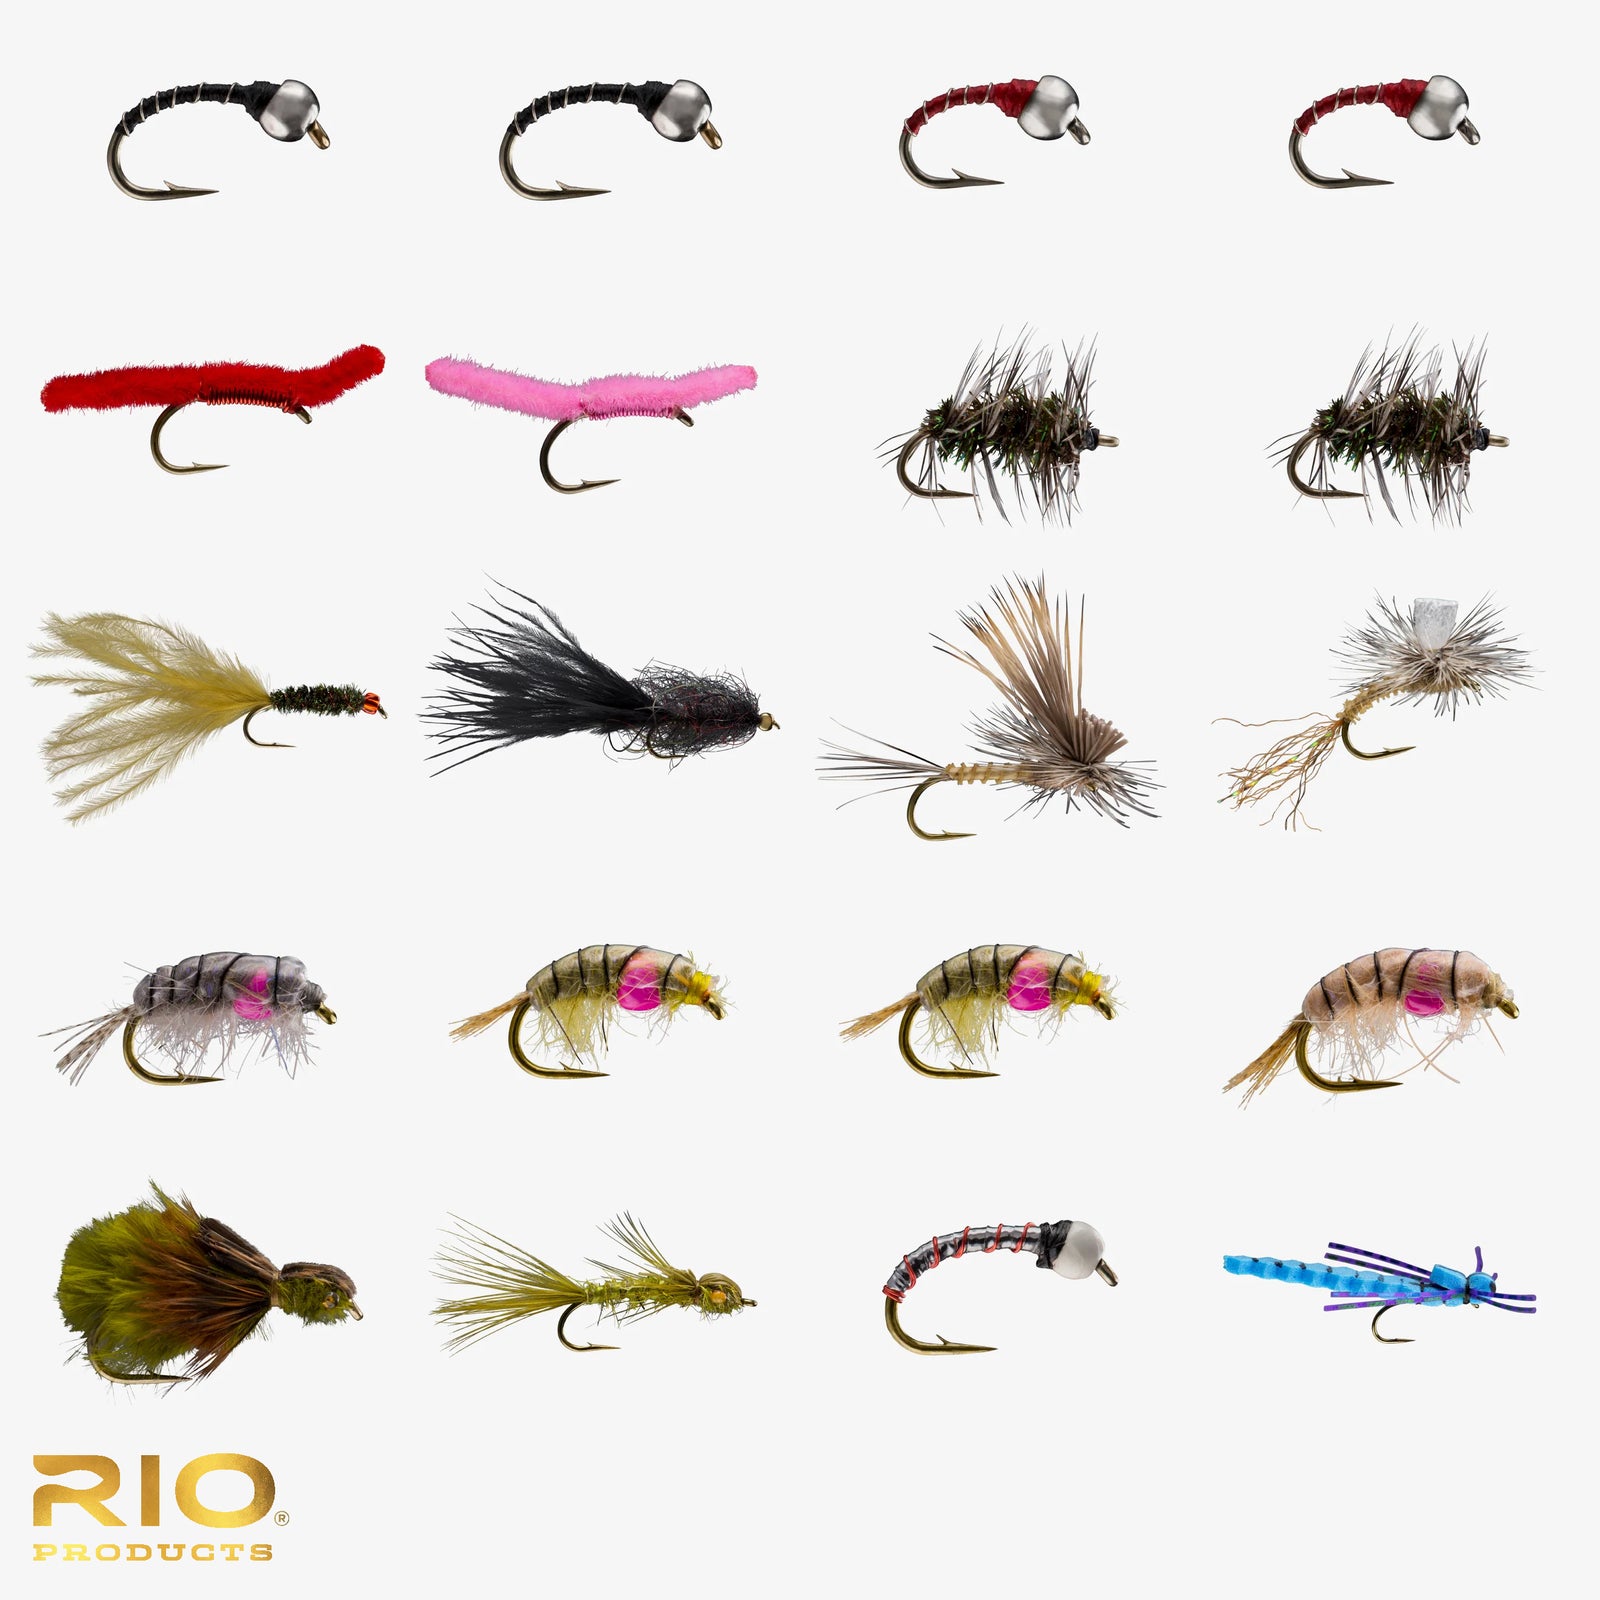 Stillwater/Lakes Fly Assortment Pack of 20 Flies